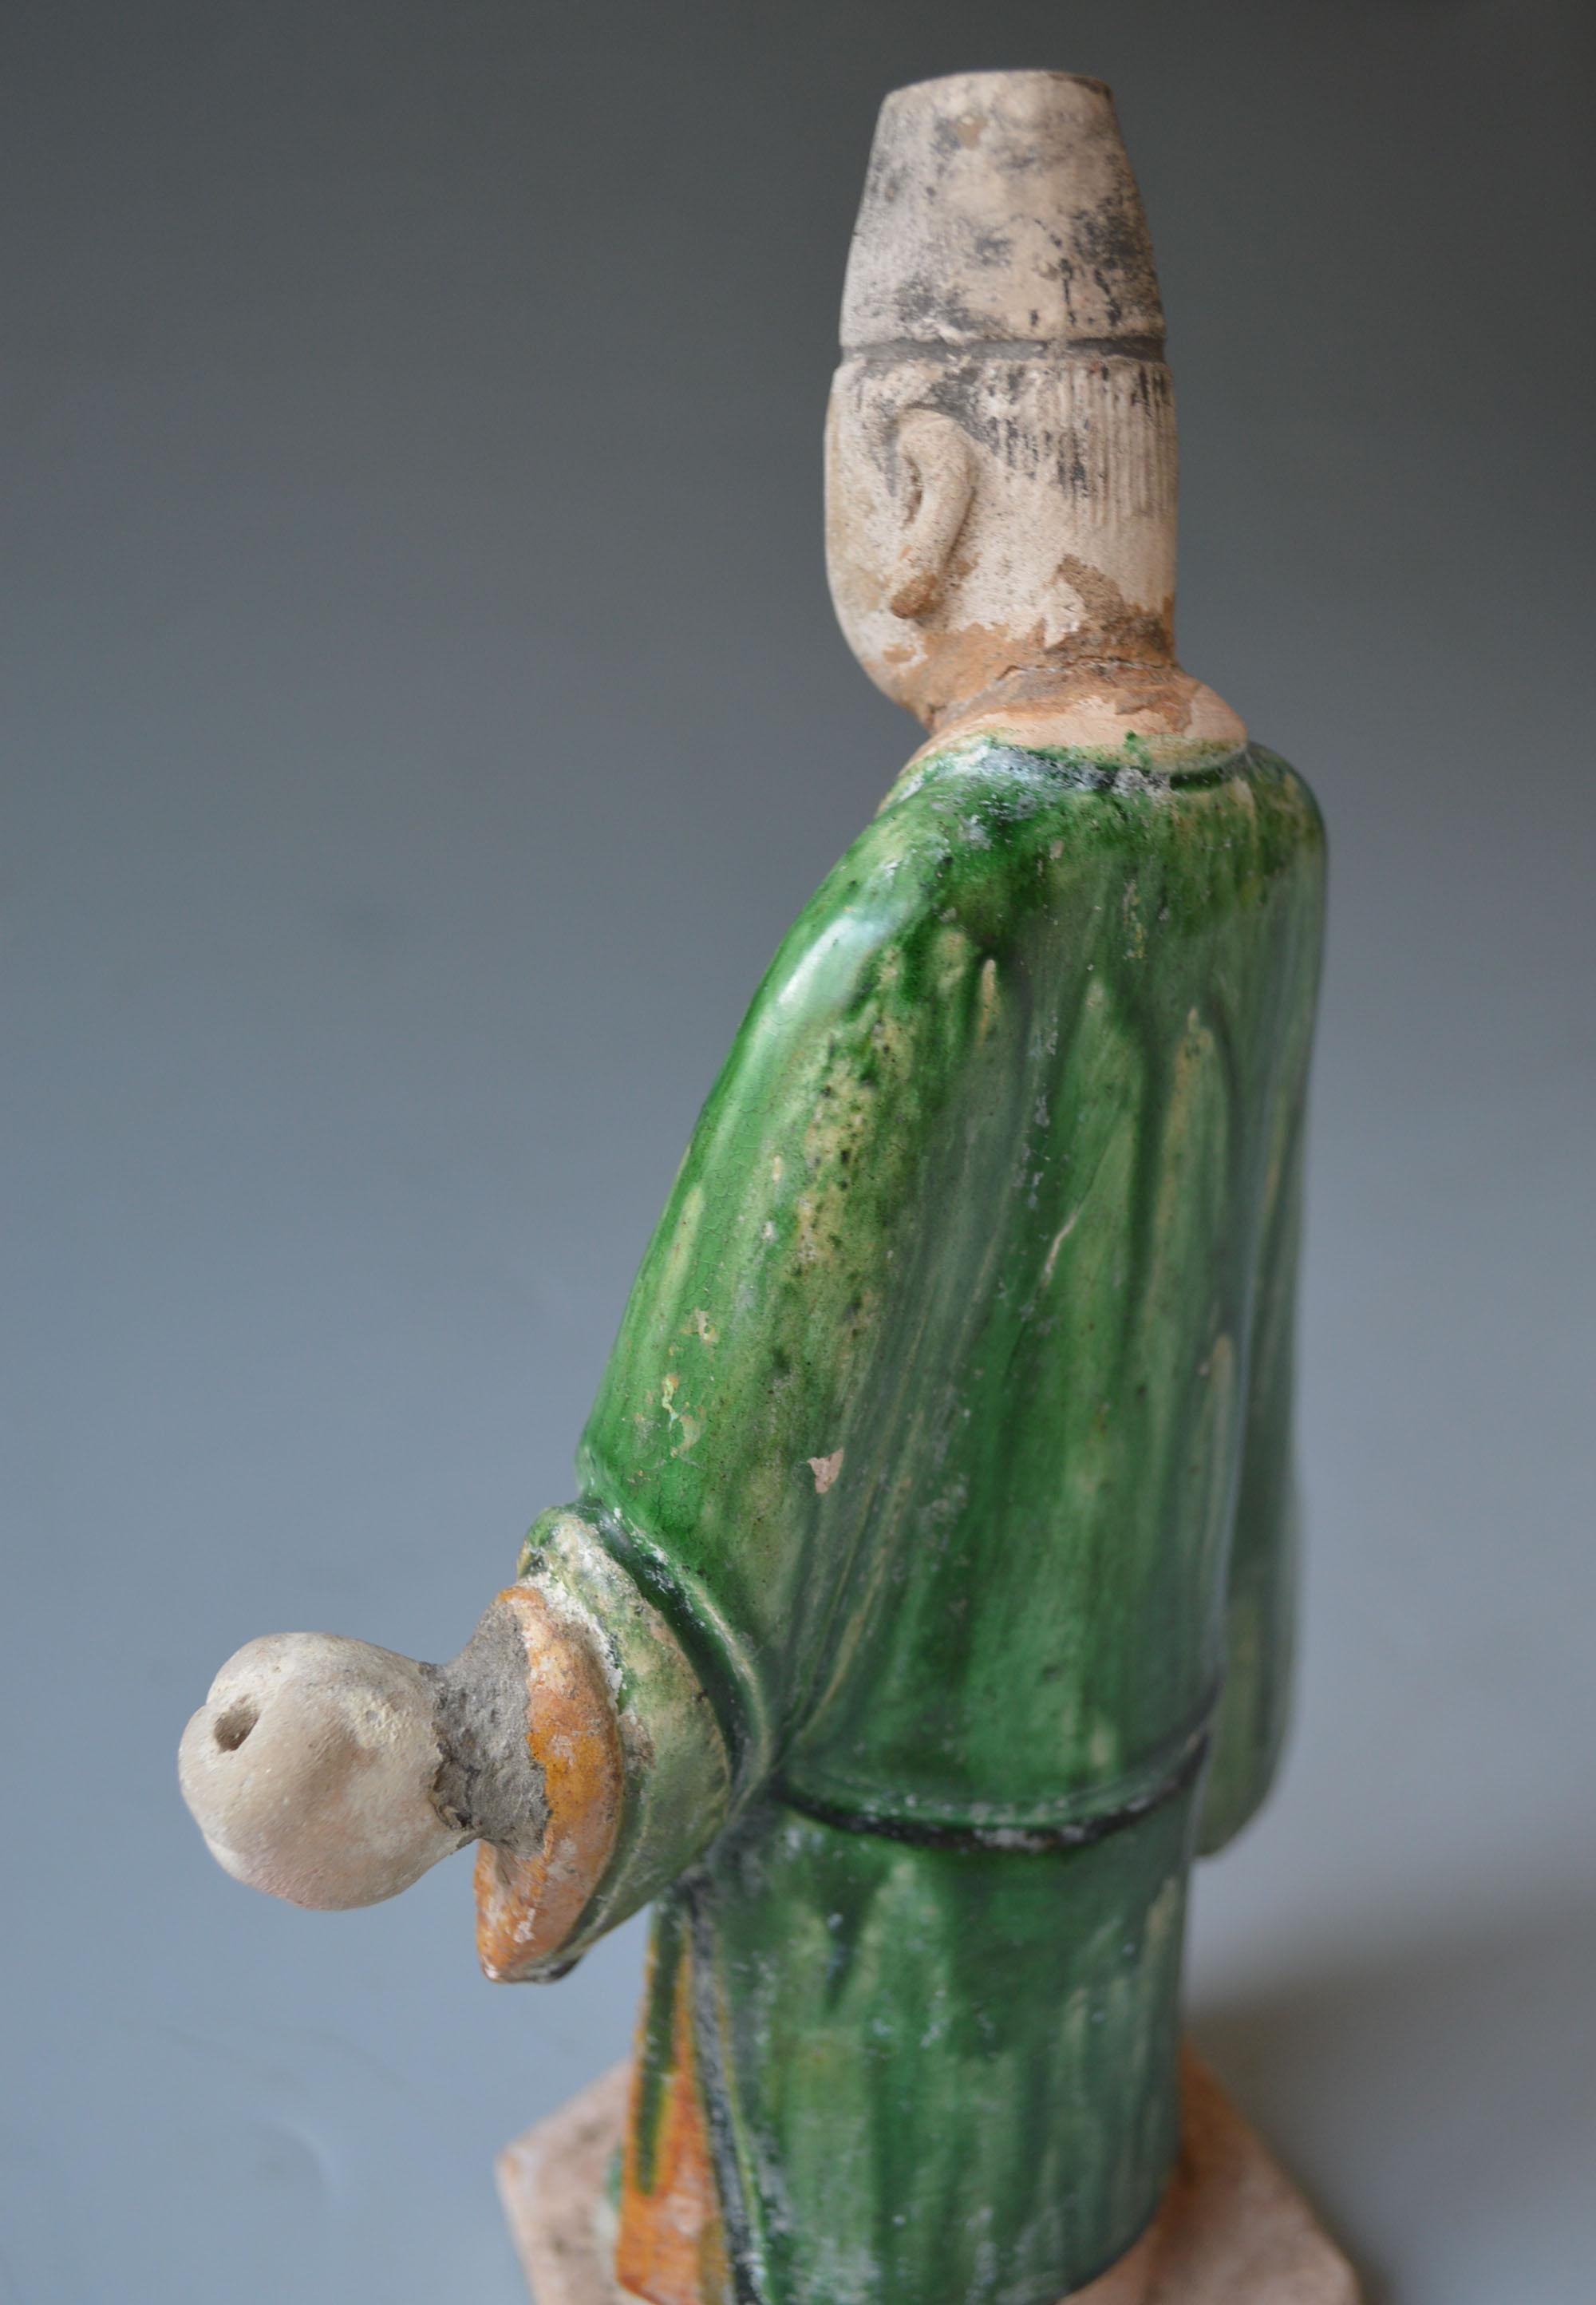 Chinese Antique Ming Dynasty Glazed Pottery Figure circa 16th Century AD In Good Condition For Sale In London, GB